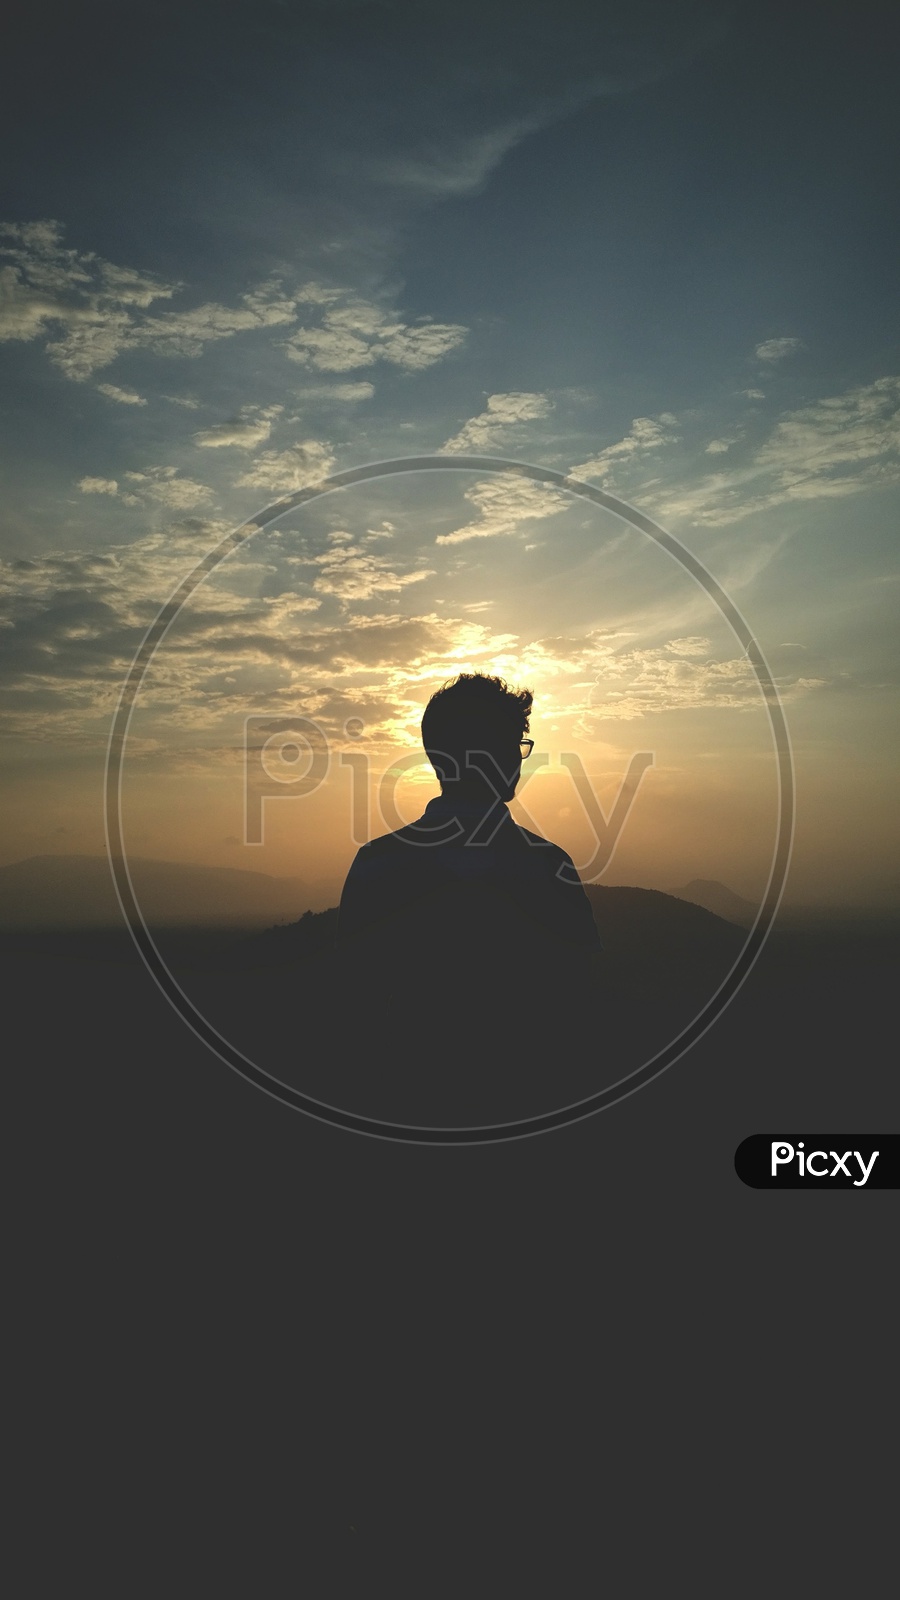 Silhouette Of a Man Over a Golden Hour Sky